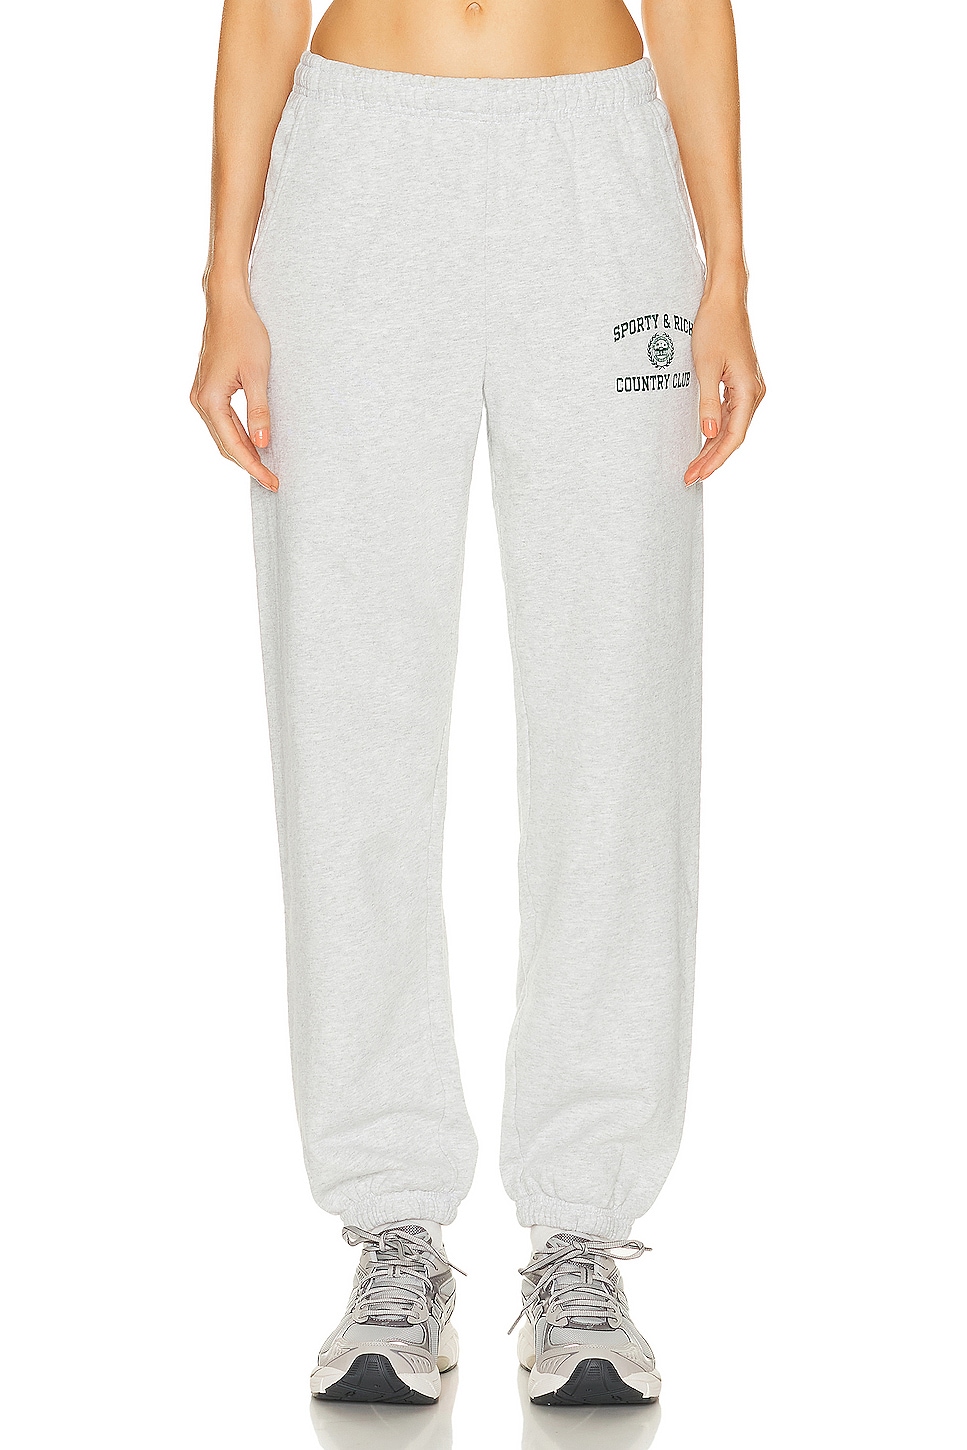 Image 1 of Sporty & Rich Varsity Crest Sweatpant in Heather Gray